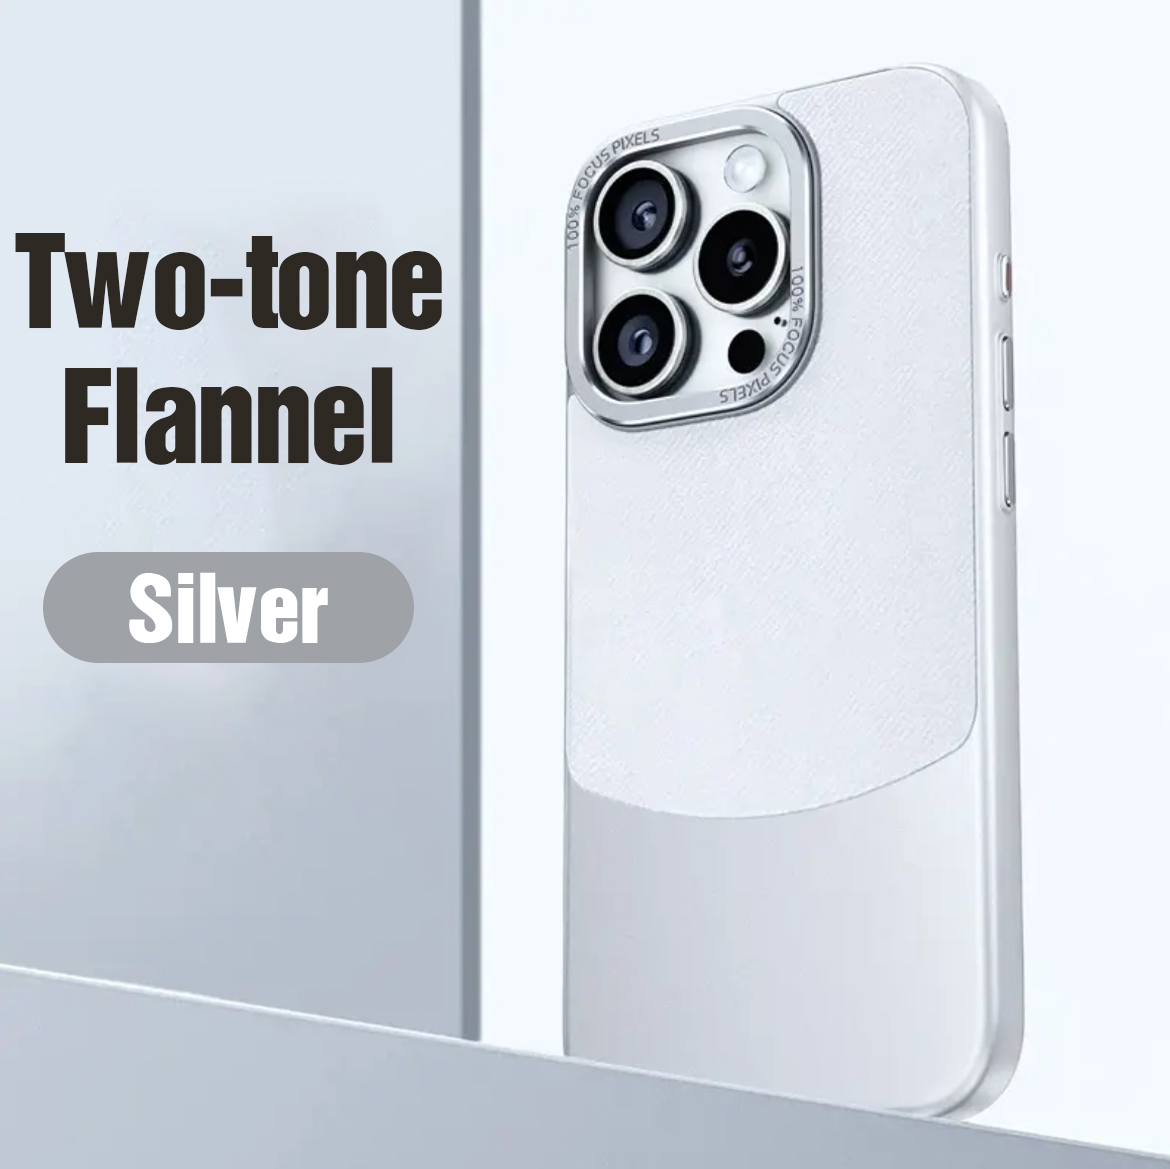 New luxury Two-tone Flannel metal lens protective case for iPhone